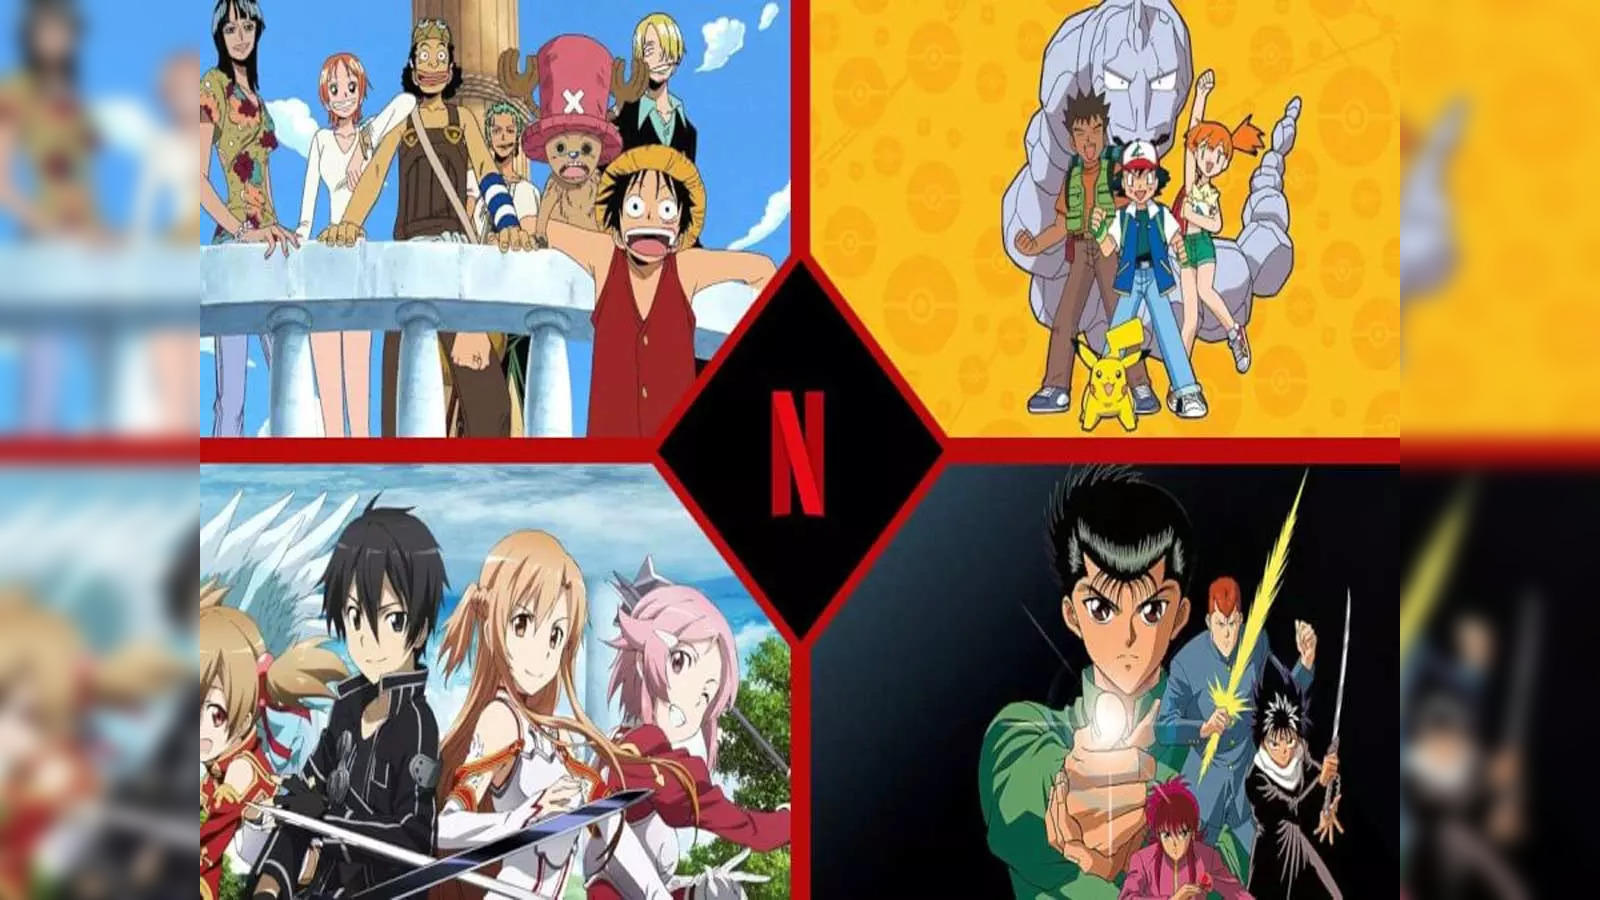 netflix: What new Anime titles to get added to Netflix in